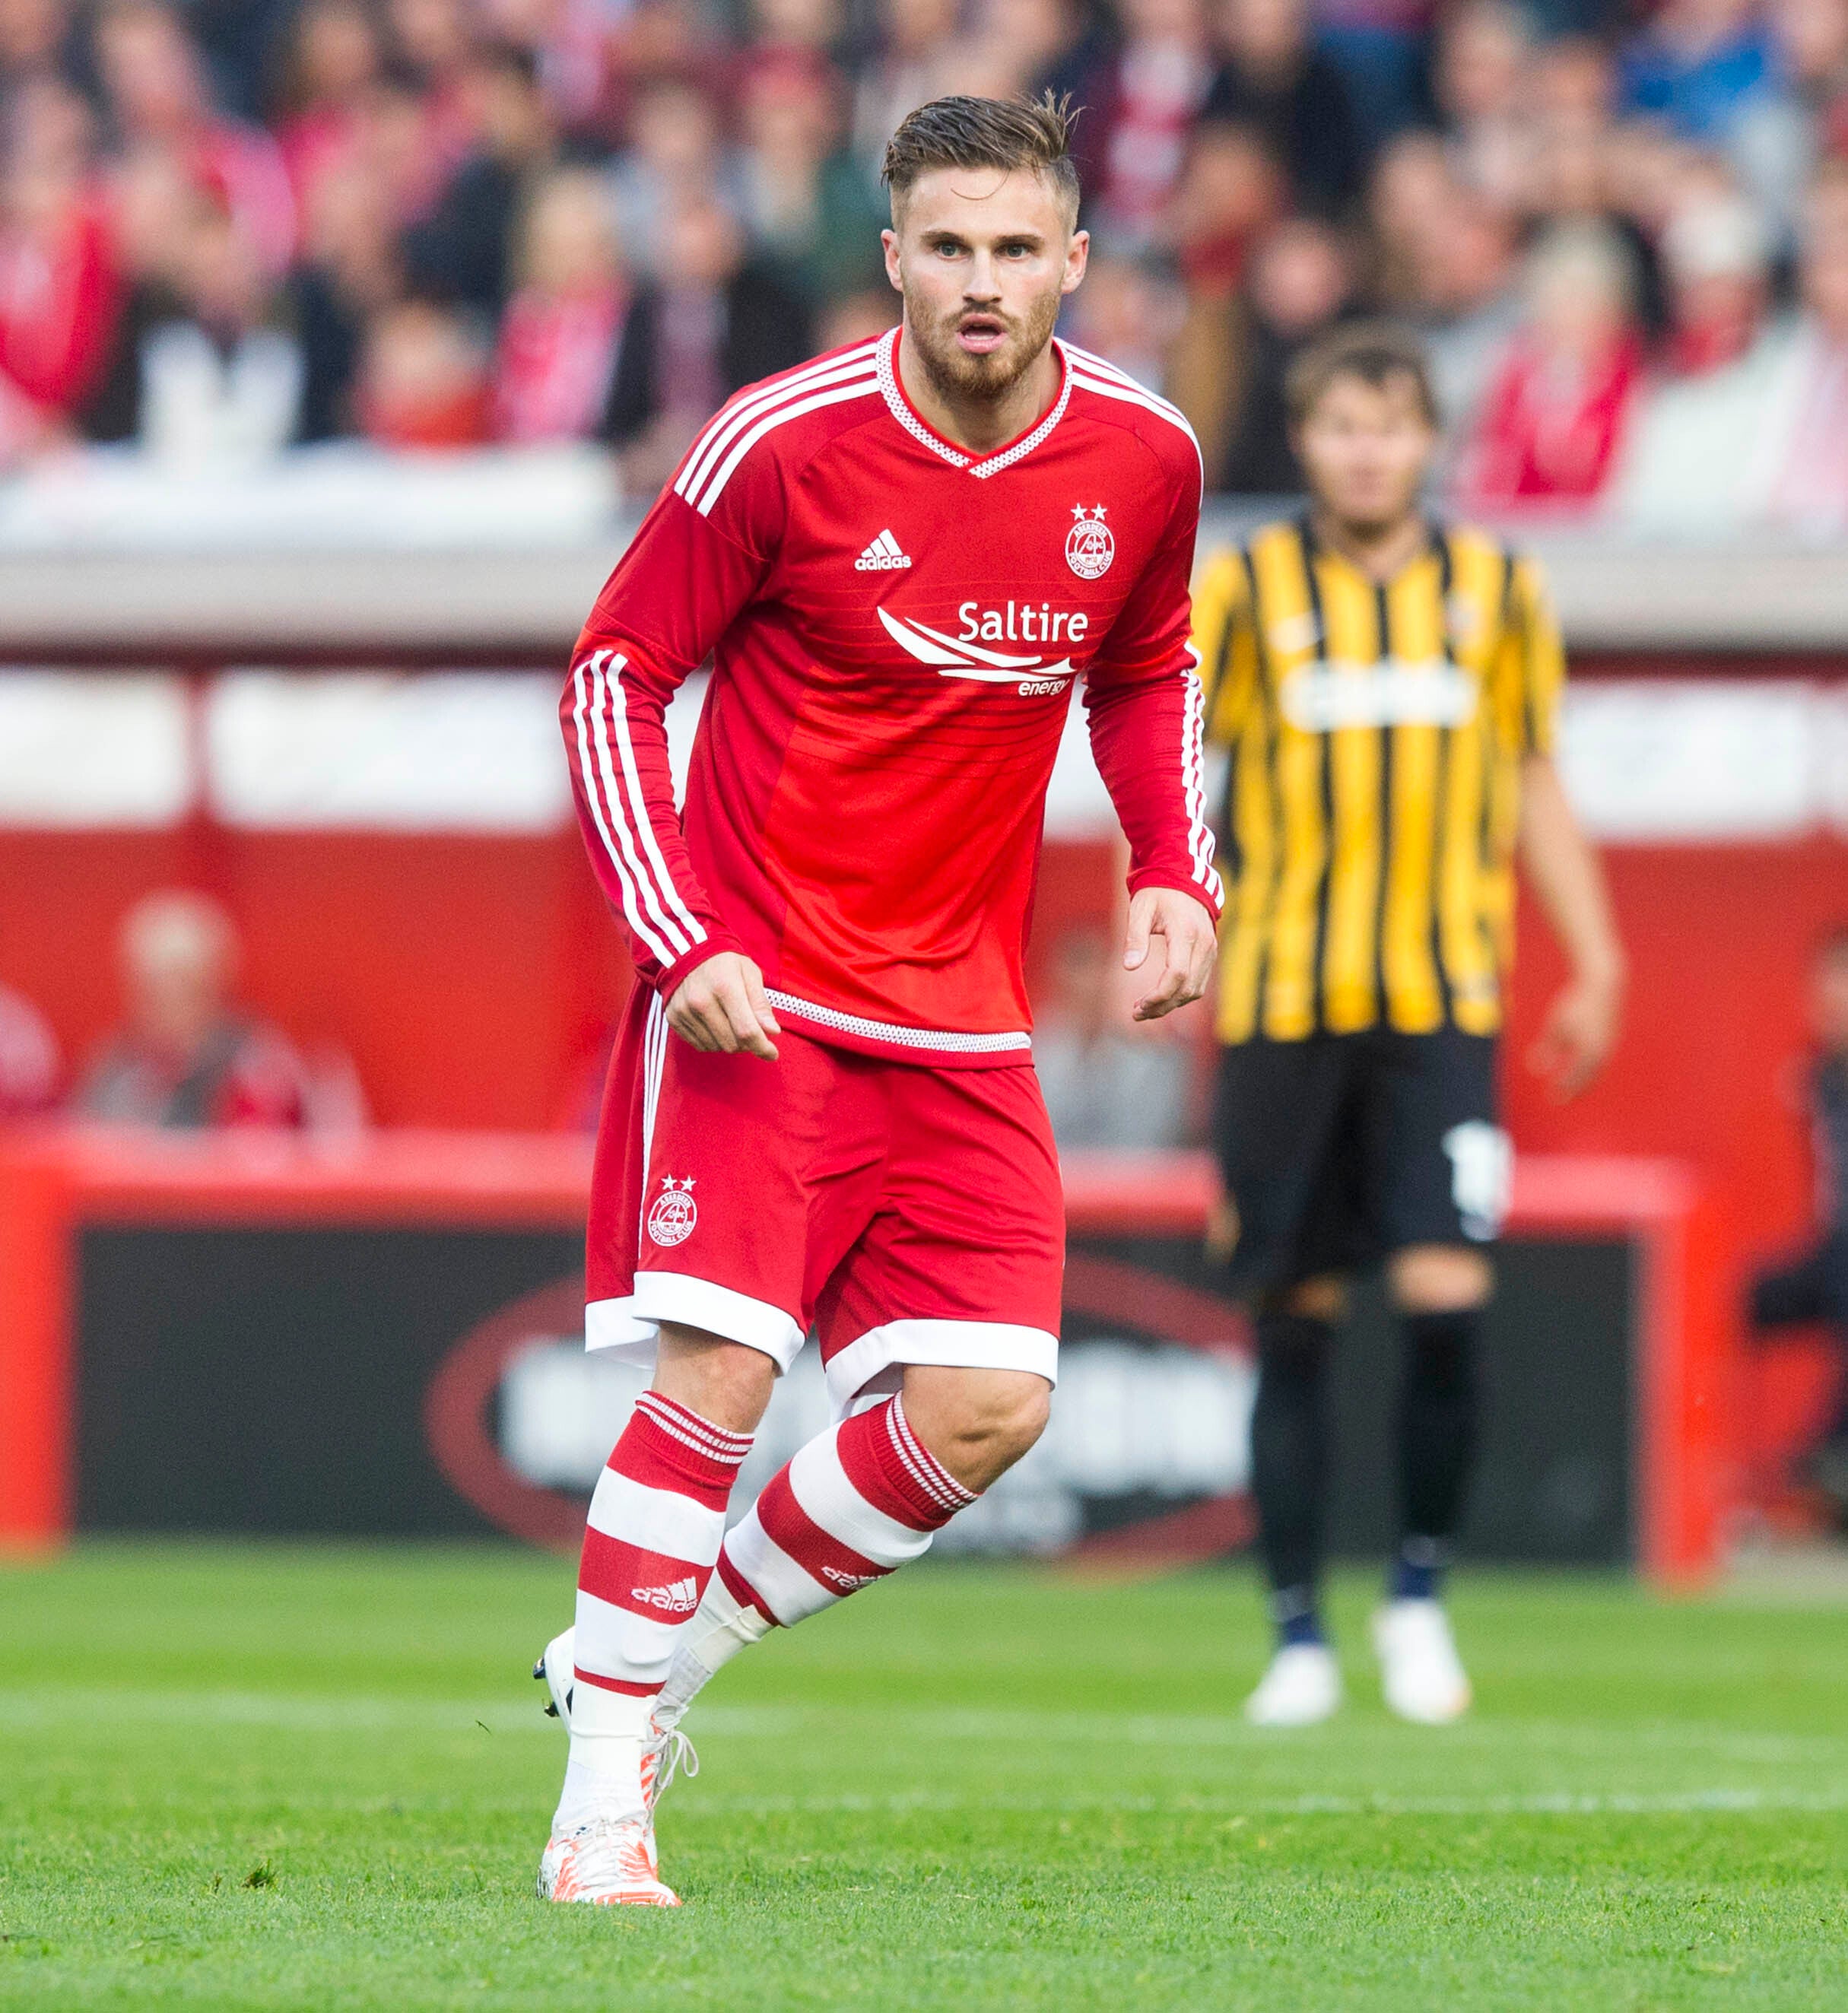 Raith Rovers’ signing of David Goodwillie has sparked a major backlash against the club (Jeff Holmes/PA)